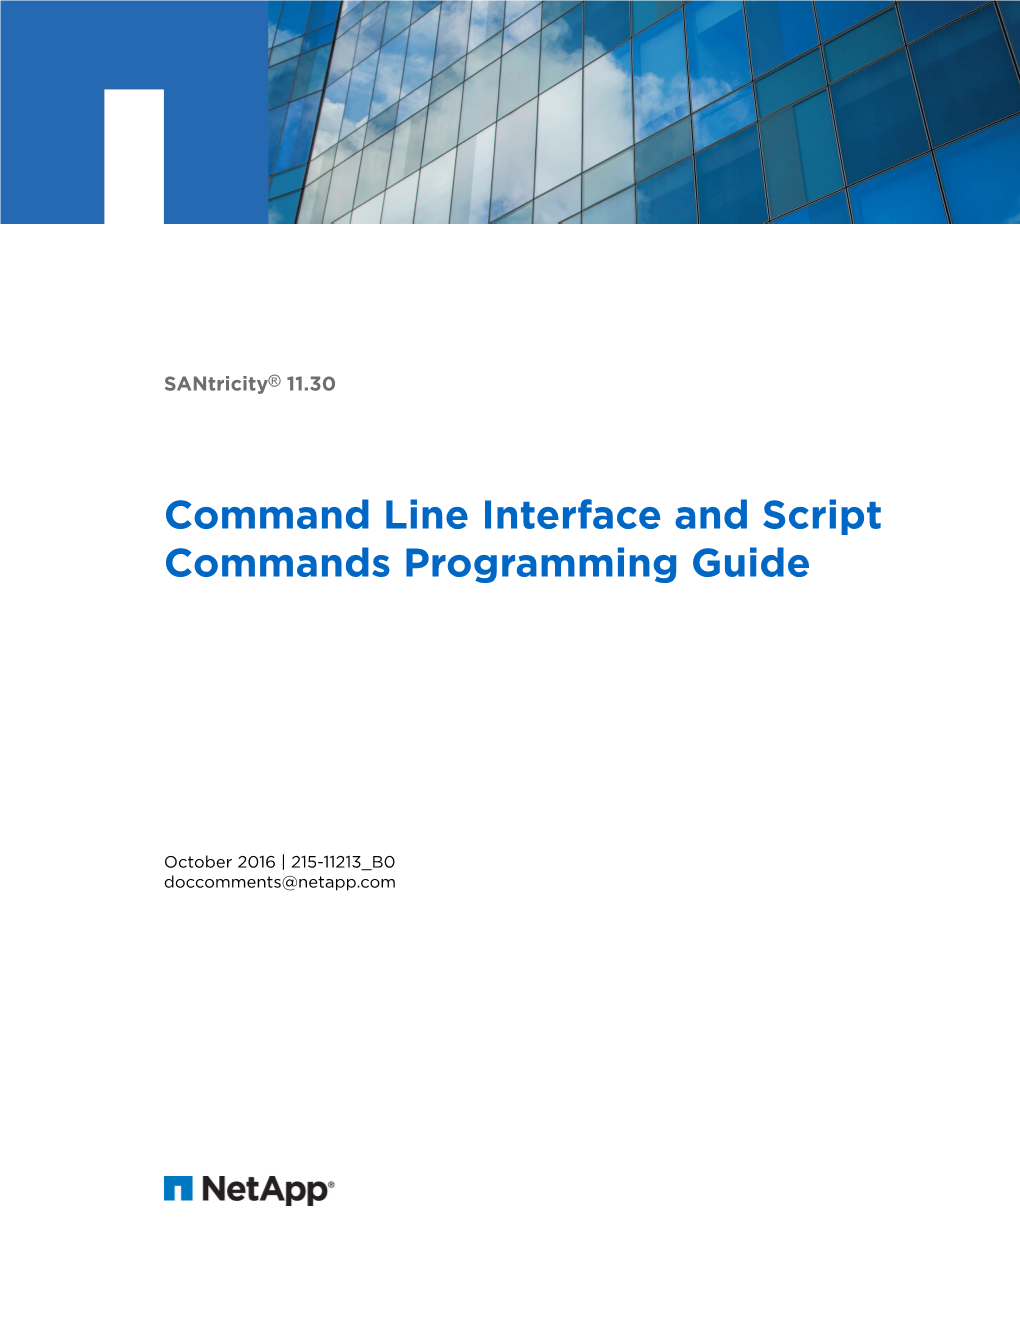 Santricity® 11.30 Command Line Interface and Script Commands Programming Guide